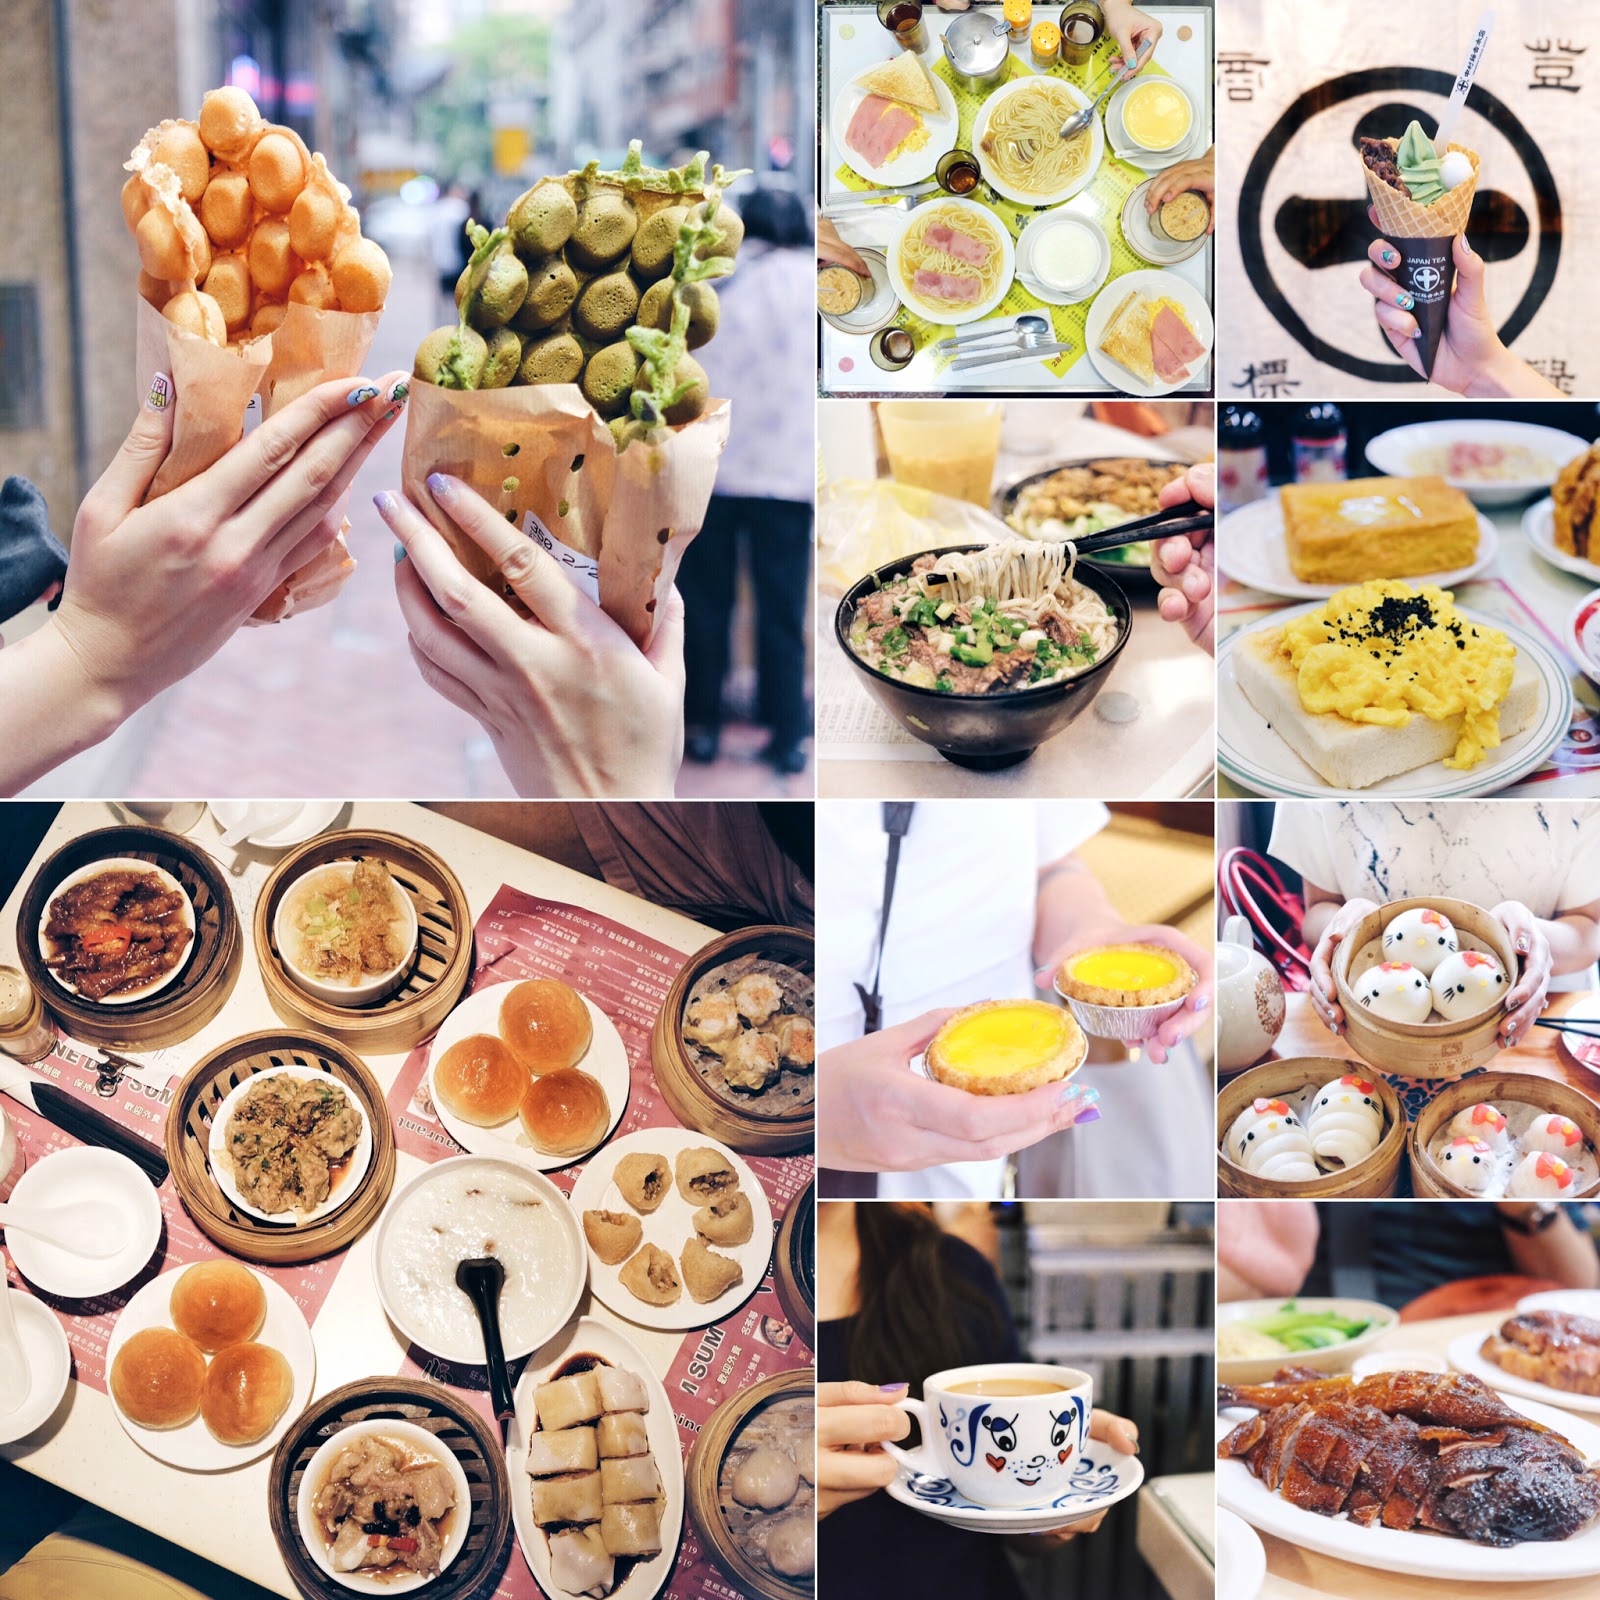 Hong Kong: The 10 MUST EAT In This City That's All About Eating (and